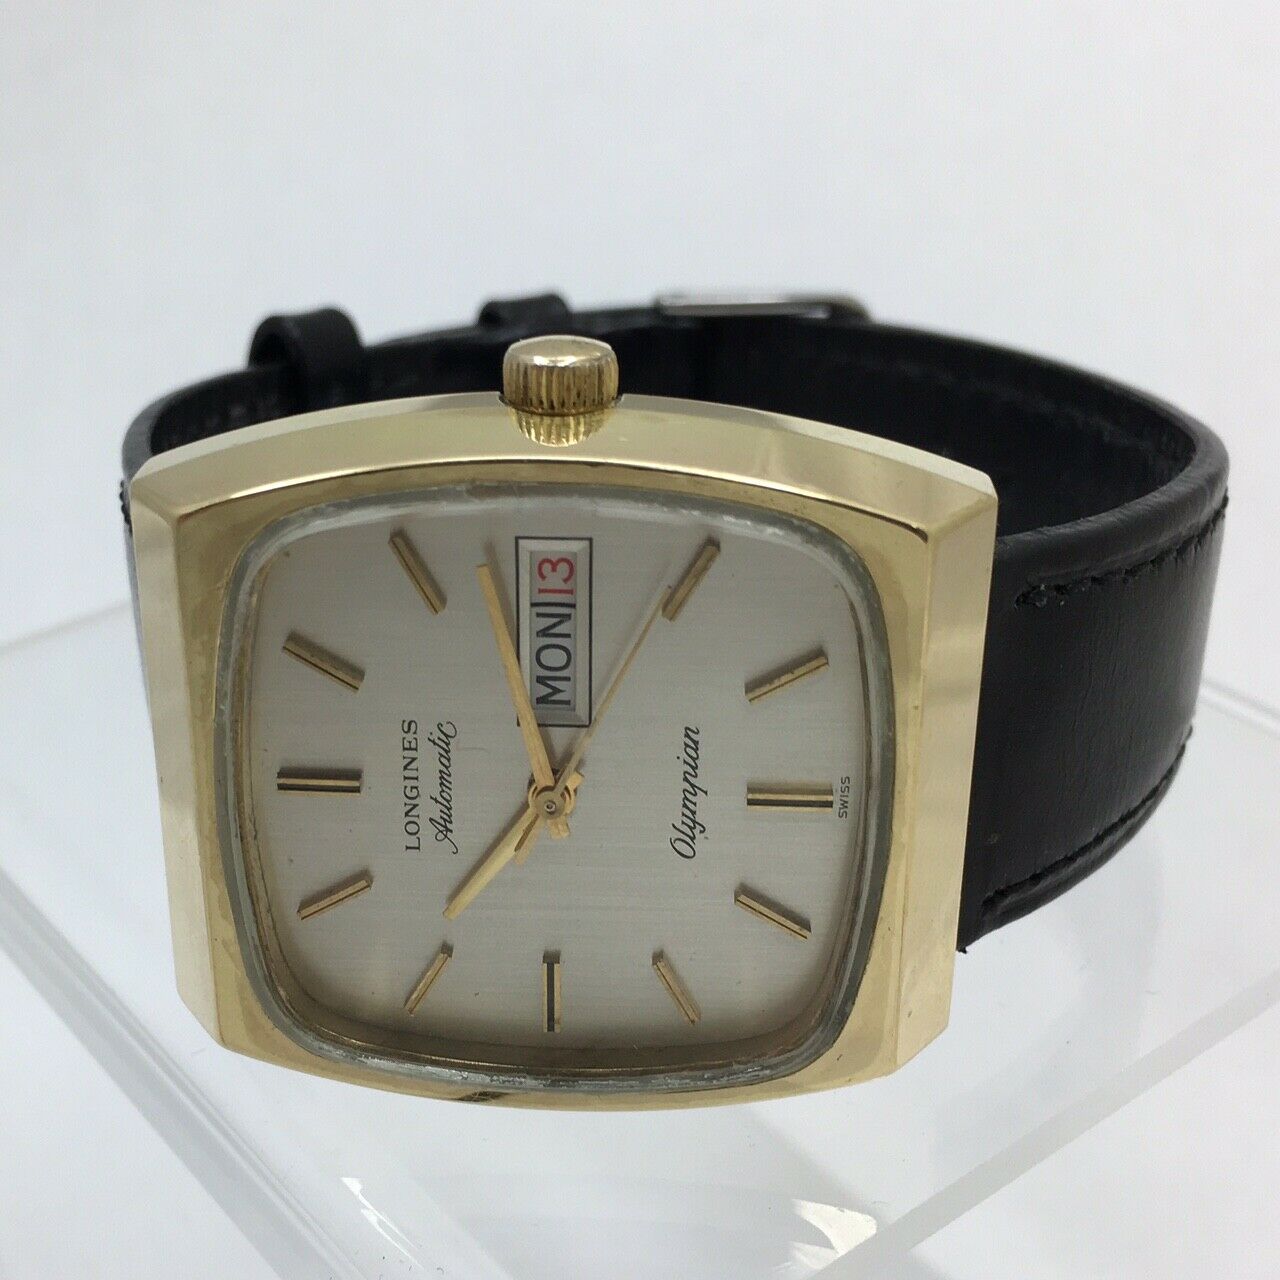 Longines Olympian Automatic Wristwatch Circa. 1970s Ref. 1038 Gold Plated